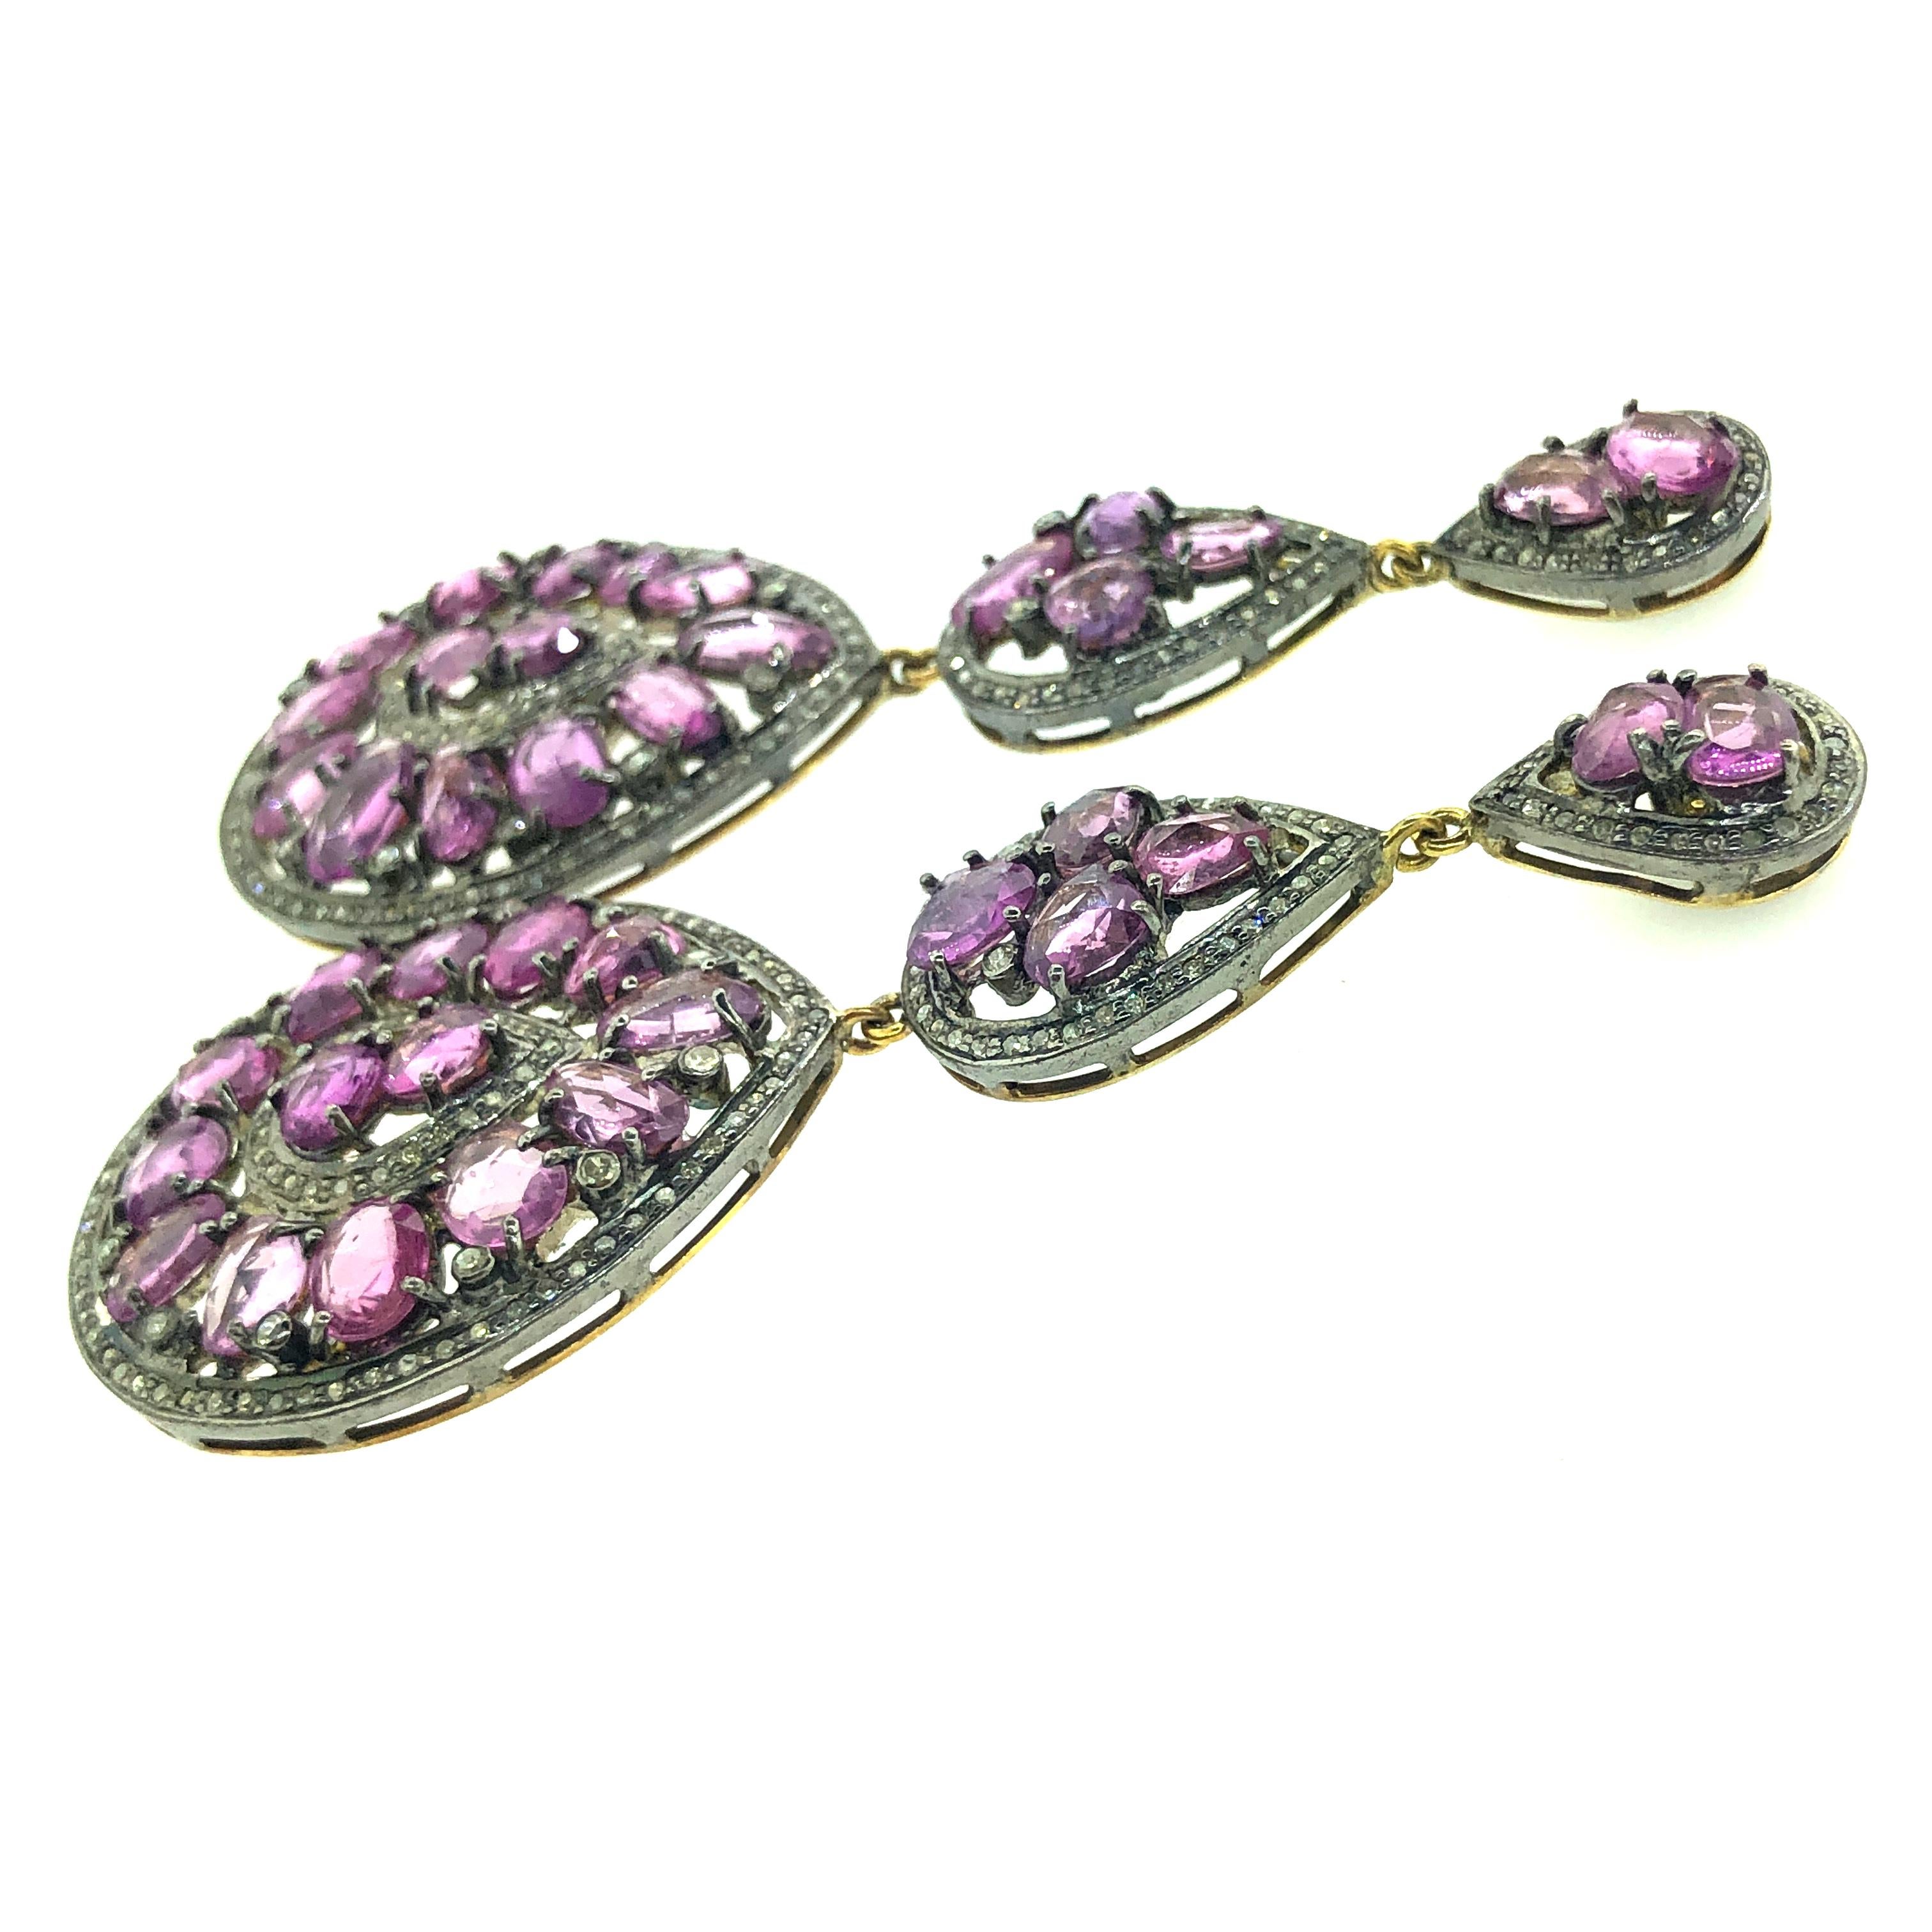 20.01 ct Pink Sapphire and 1.53 ct Champagne Diamond Earring set in Oxidized Sterling Silver with pure 14K Gold post and jump rings. The earring is 3 Inch Long with three tear drop shapesjoint with each other by 14K Gold Jumprings. All the stones